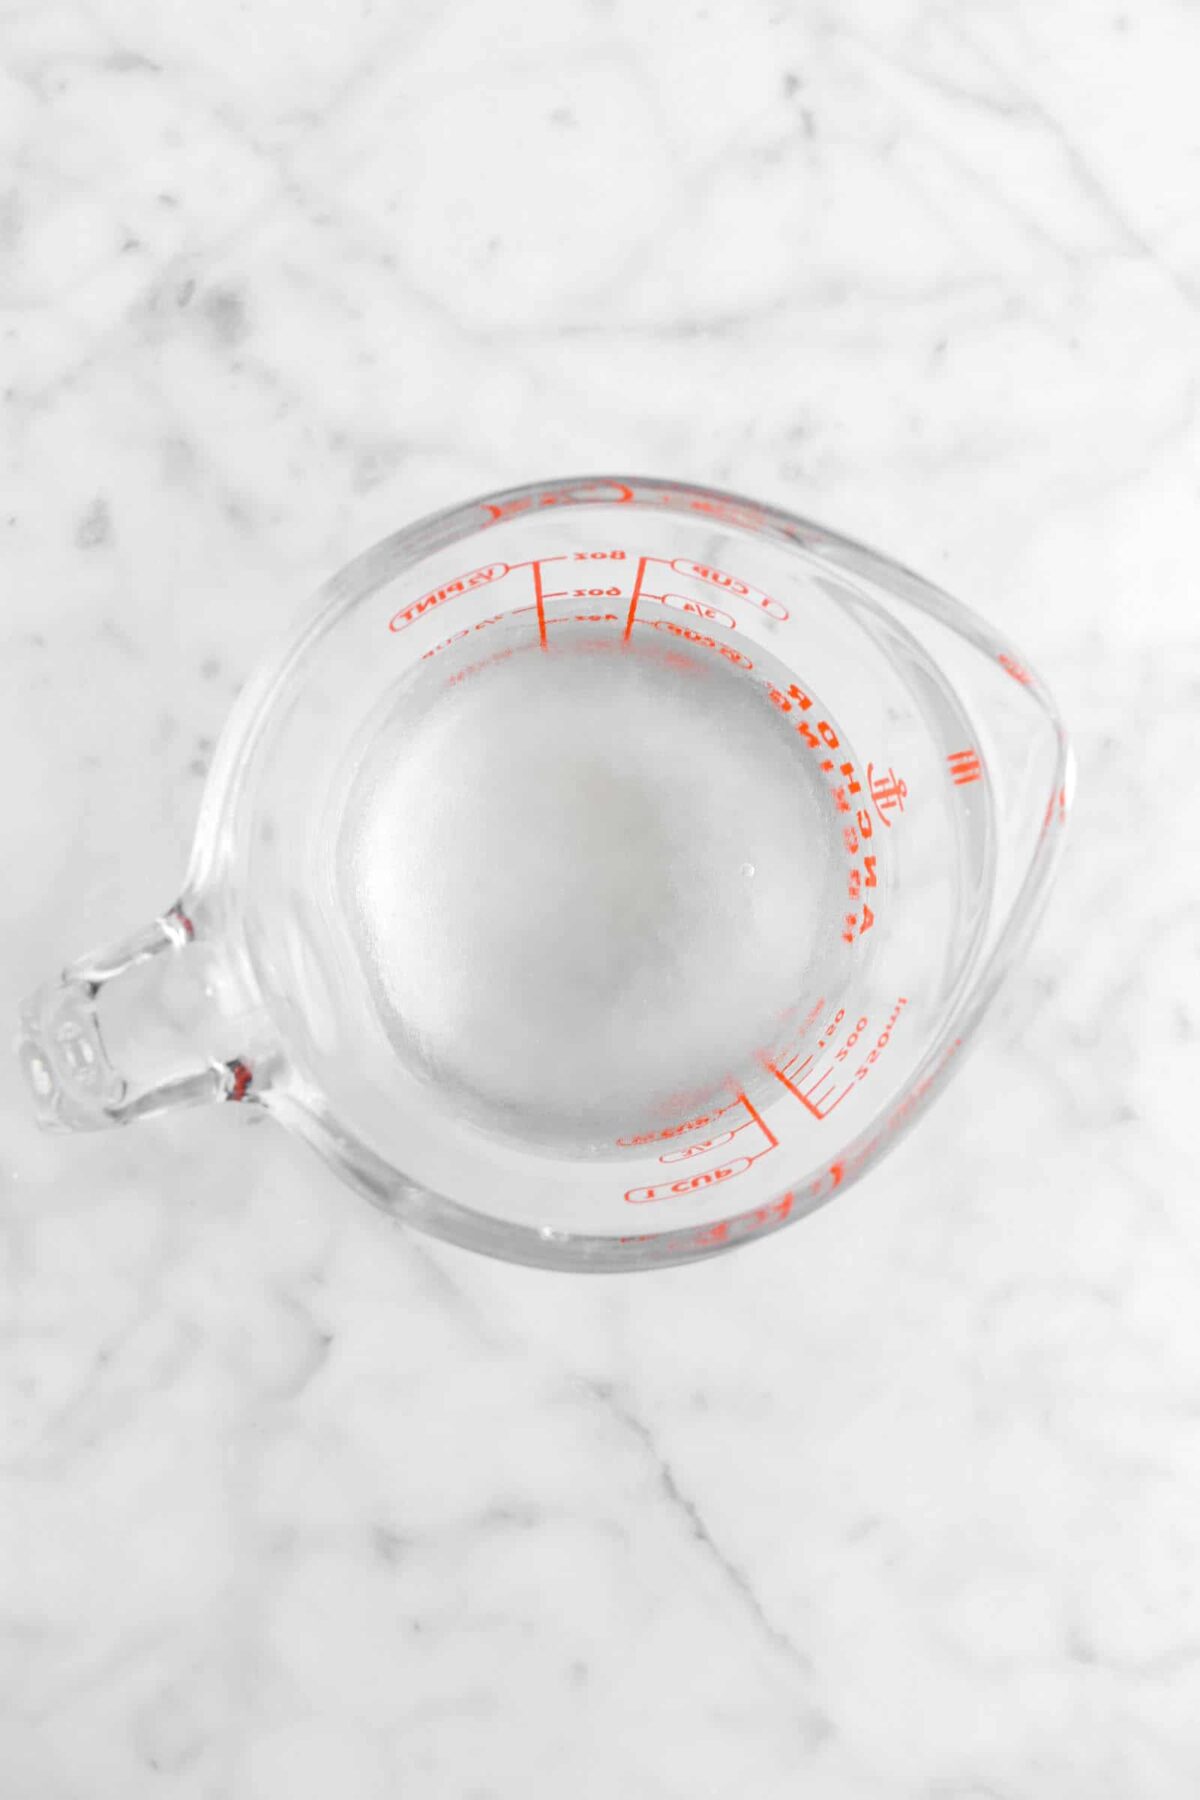 corn syrup and water in measuring cup